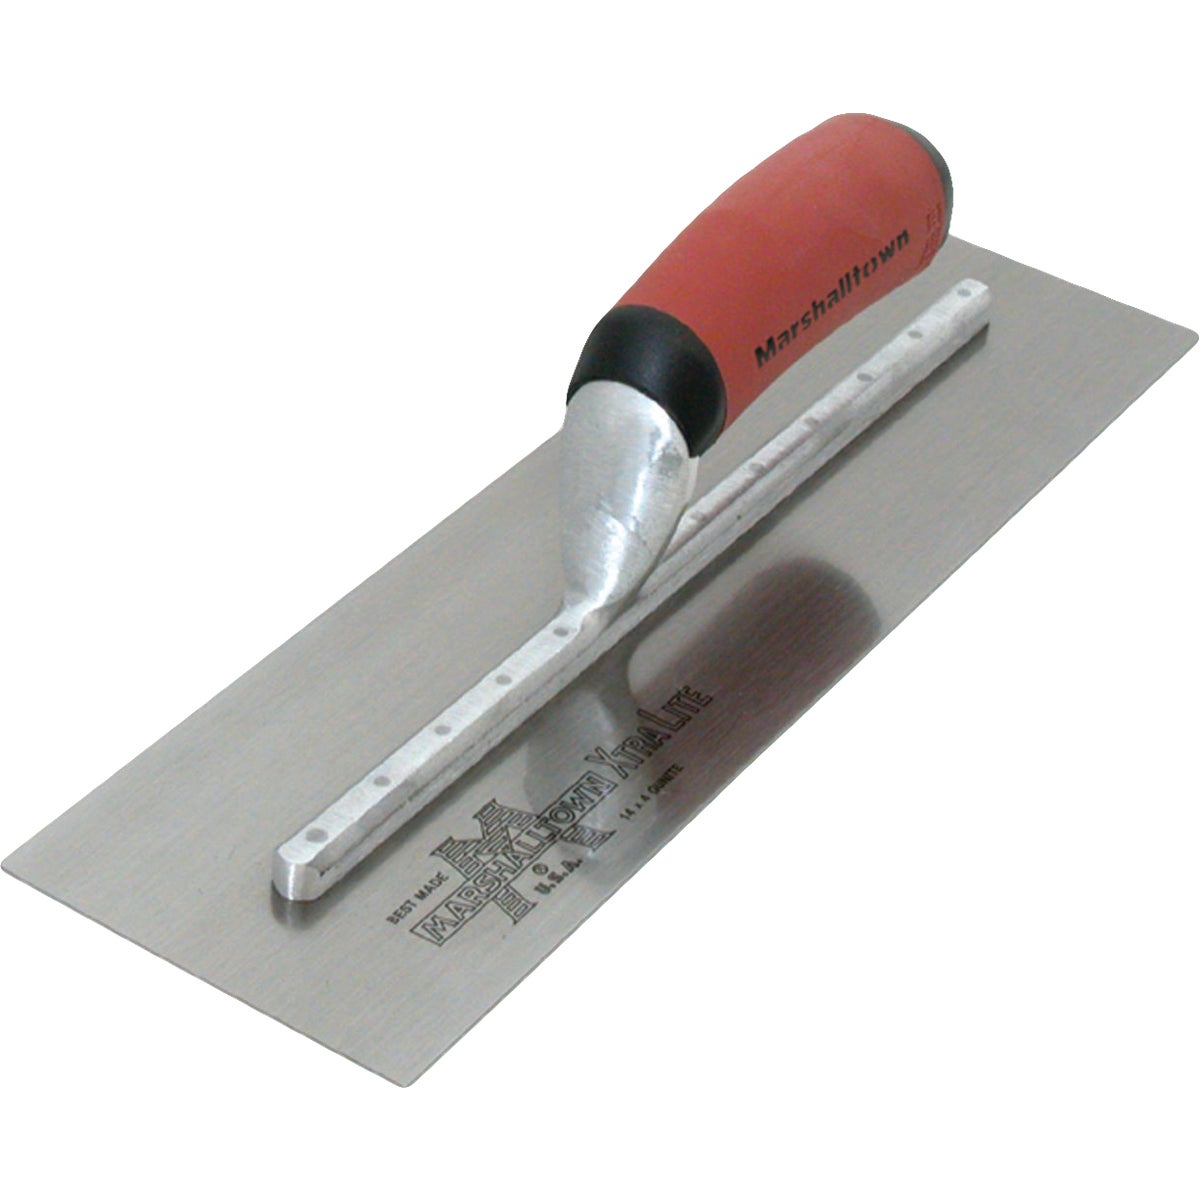 Marshalltown Xtralite 5 In. x 13 In. Finishing Trowel with Curved DuraSoft Handle